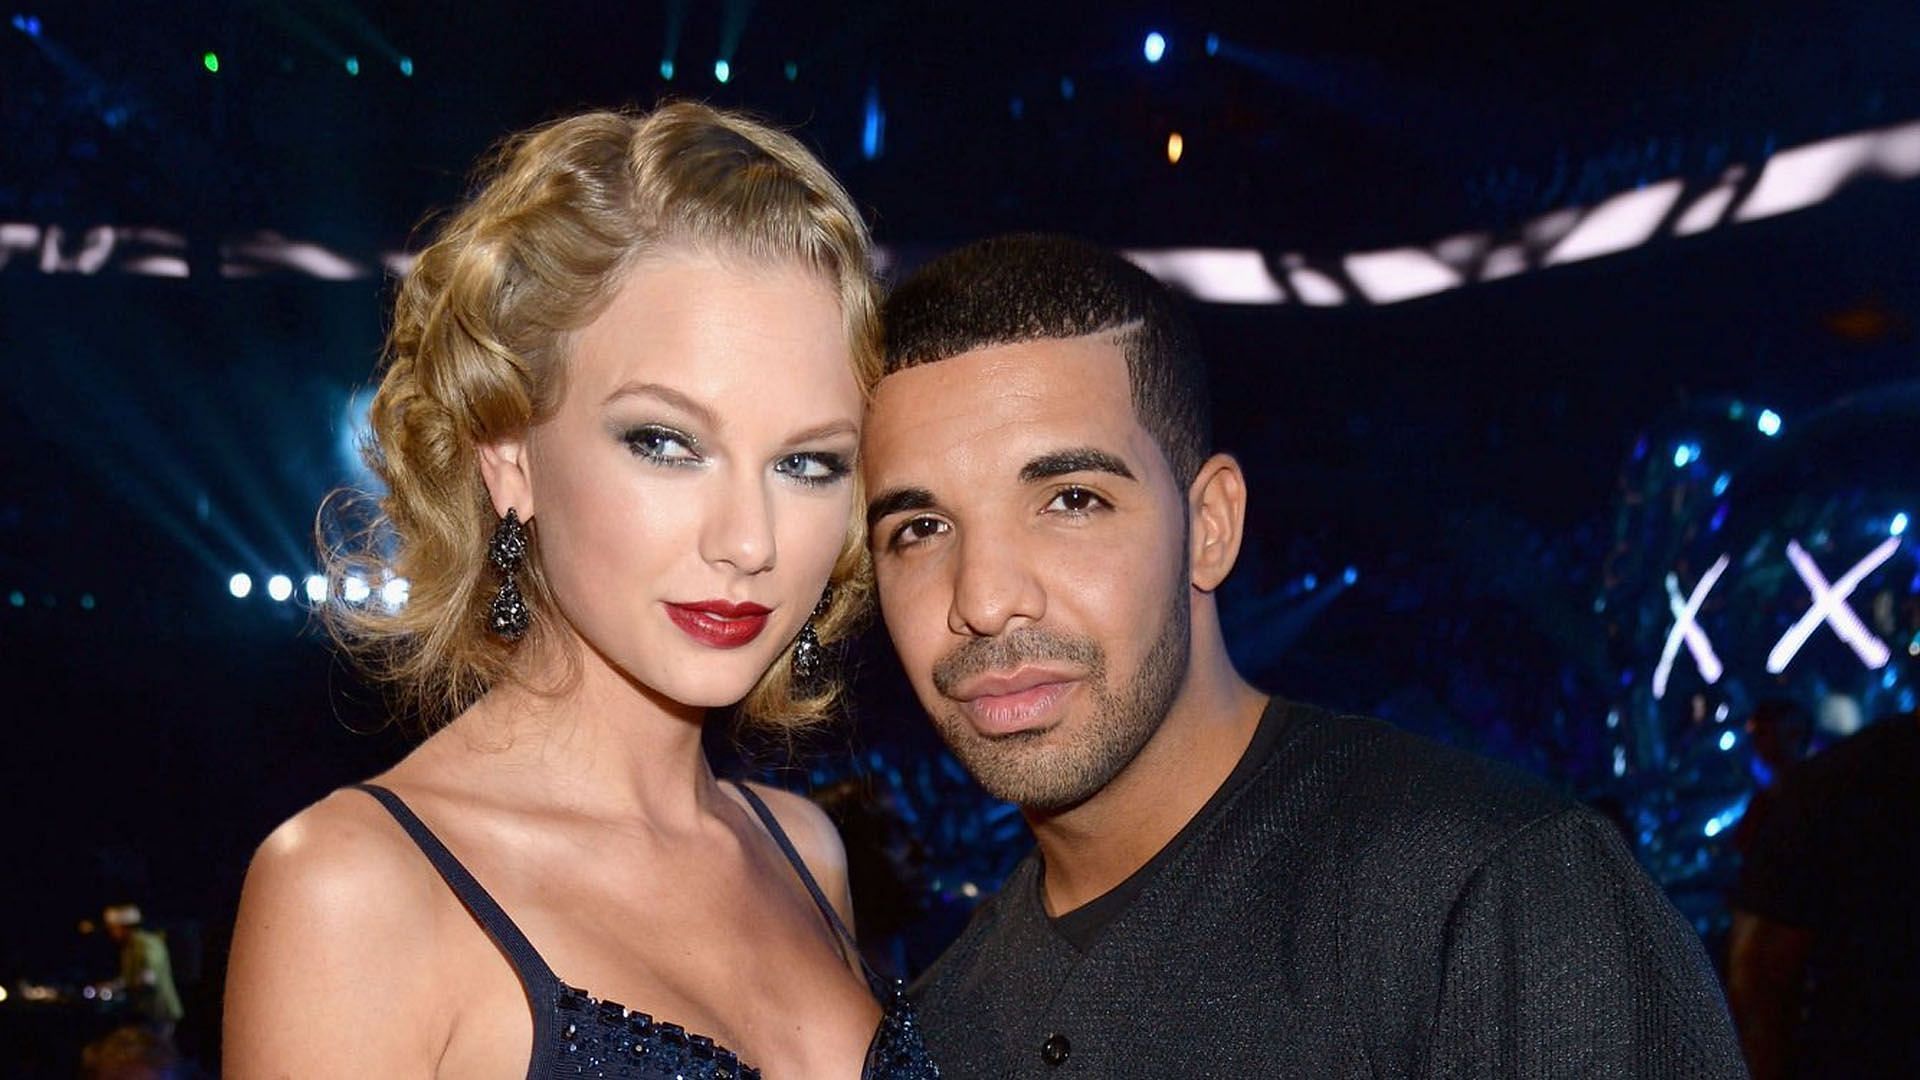 Drake has seemly thrown shade on Taylor Swift in his recent Instagram Story (Image via Getty Images)